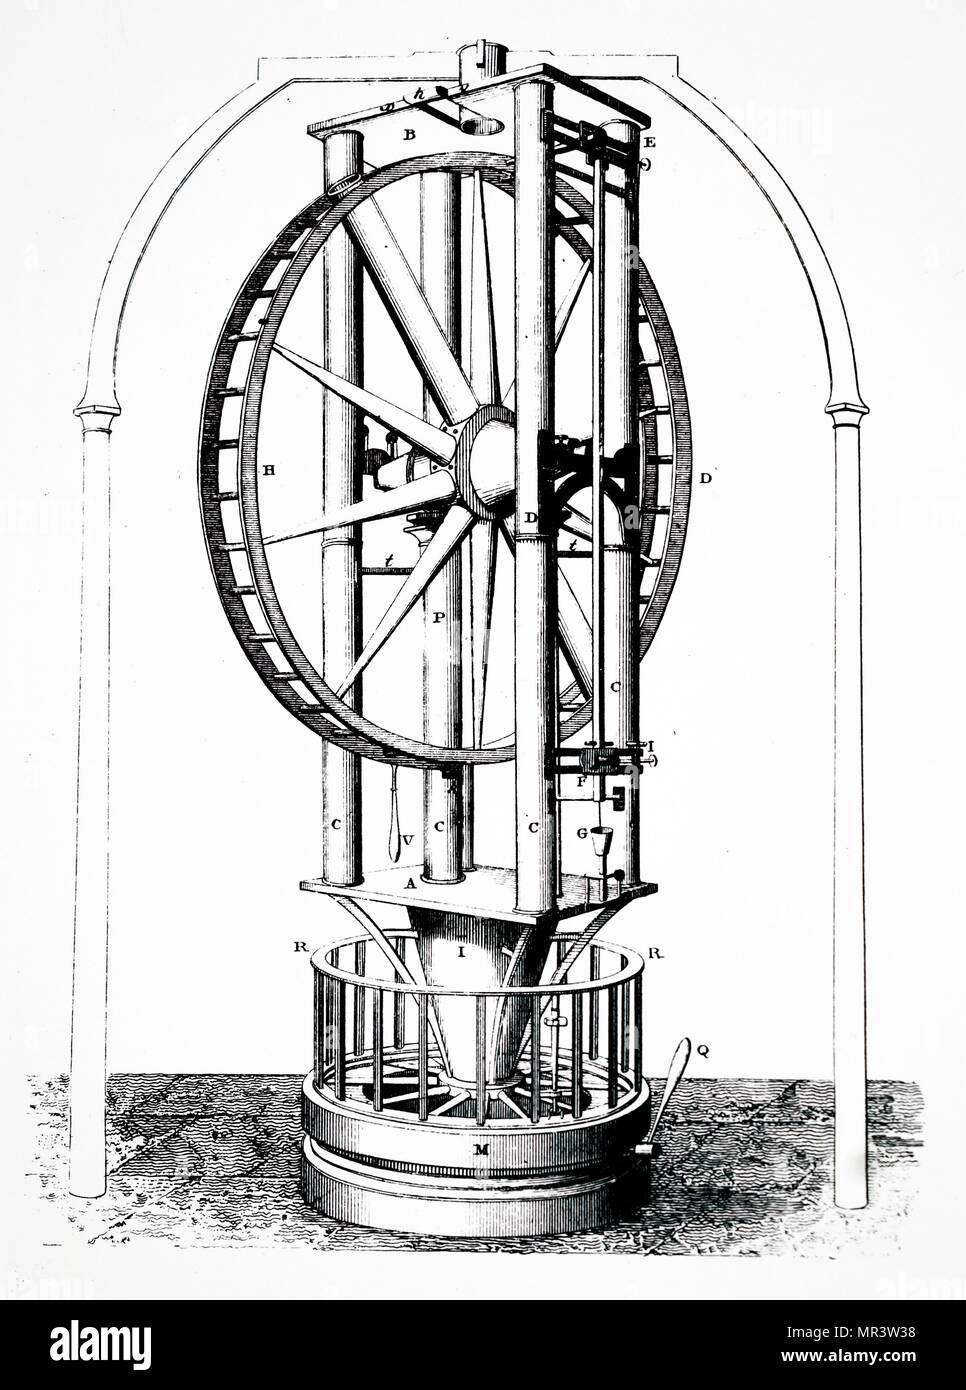 Giuseppe Piazzi's Palermo Circle: refracting telescope with achromatic lens of 5 ft local length. Piazzi used this instrument to discover the asteroid Ceres. Dated 19th century Stock Photo